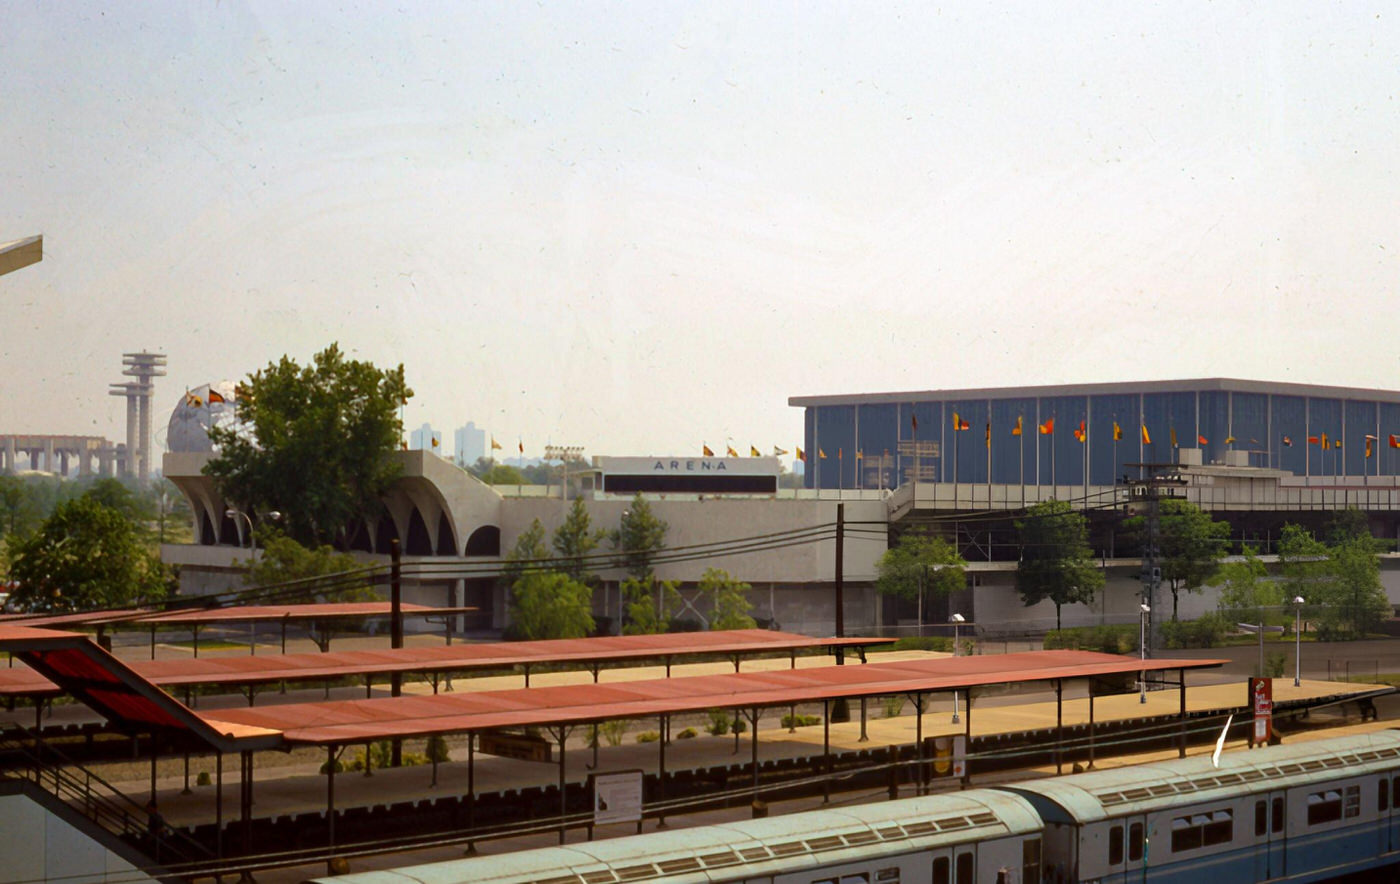 The Former New York World'S Fairgrounds In Flushing Meadows, Queens, With Attractions From The 1964-1965 Fair, 1960S.